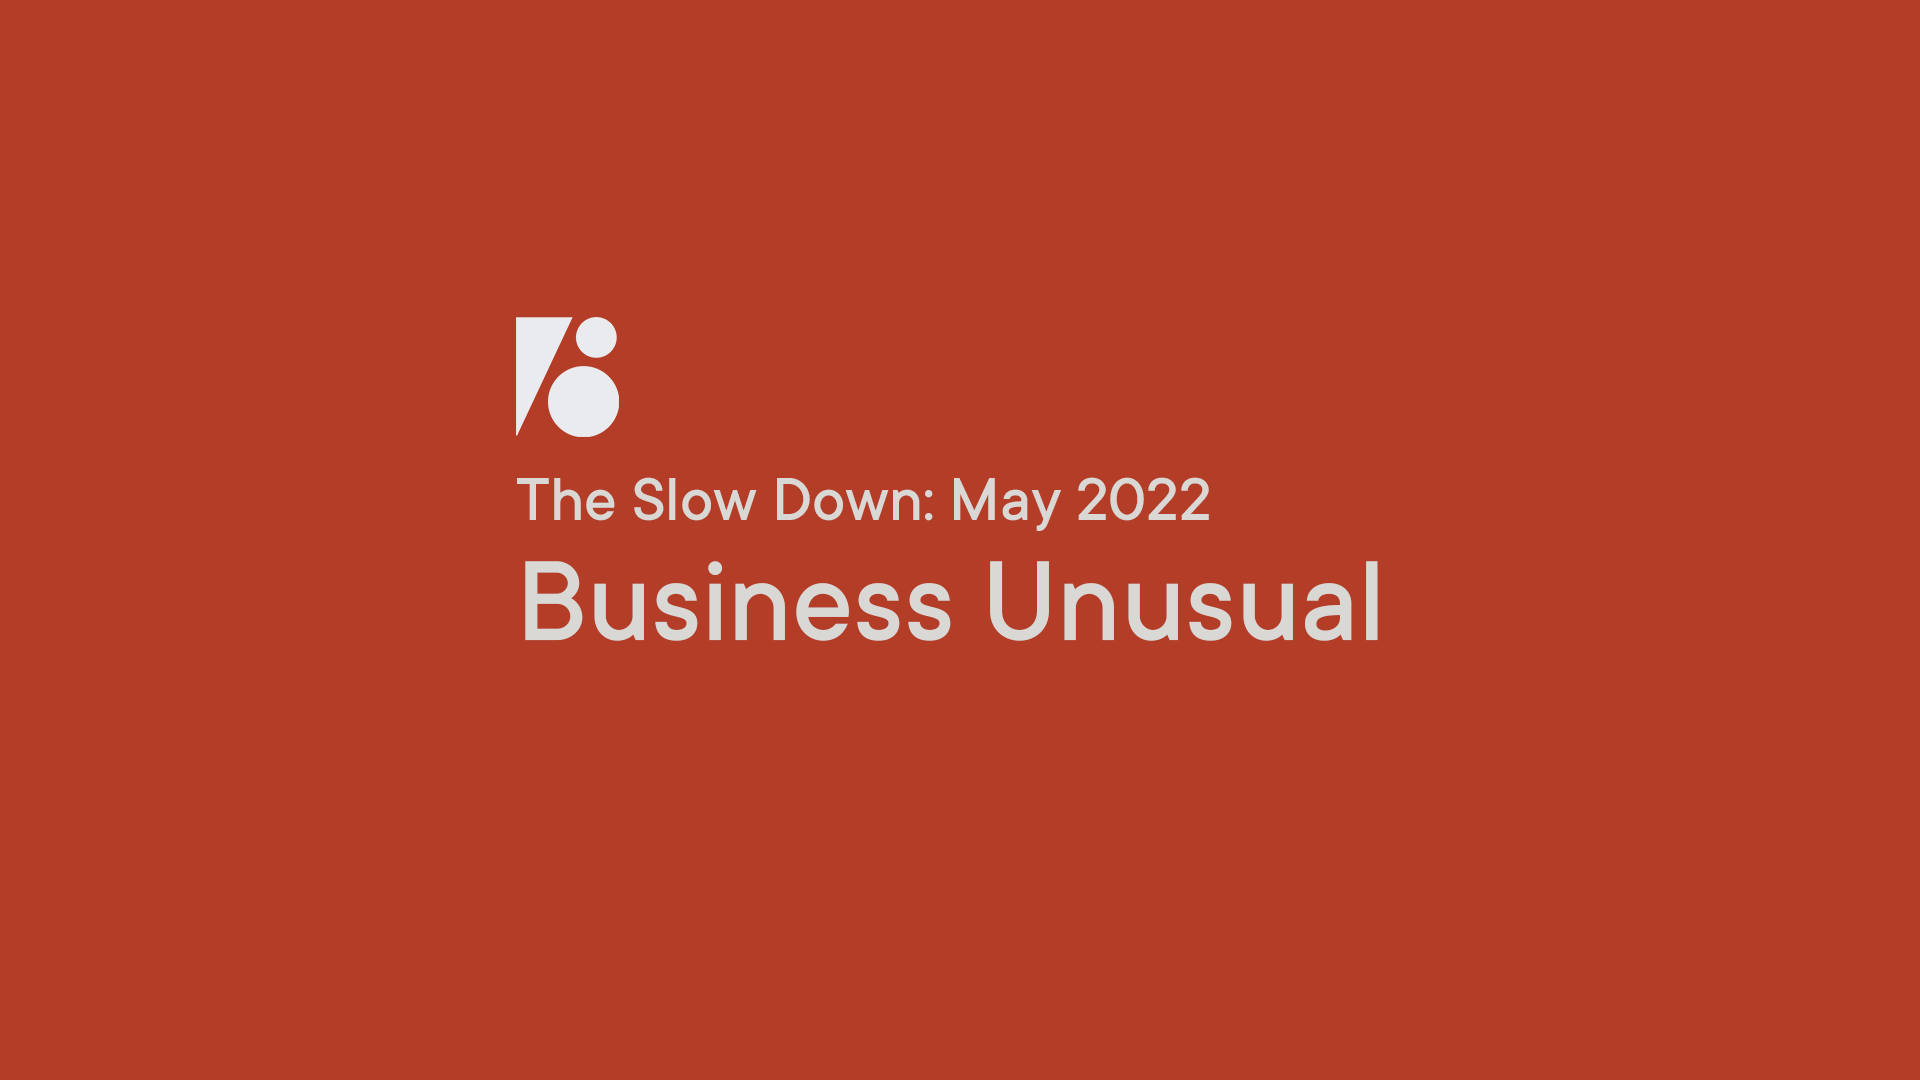 The Slow Down: Business Unusual